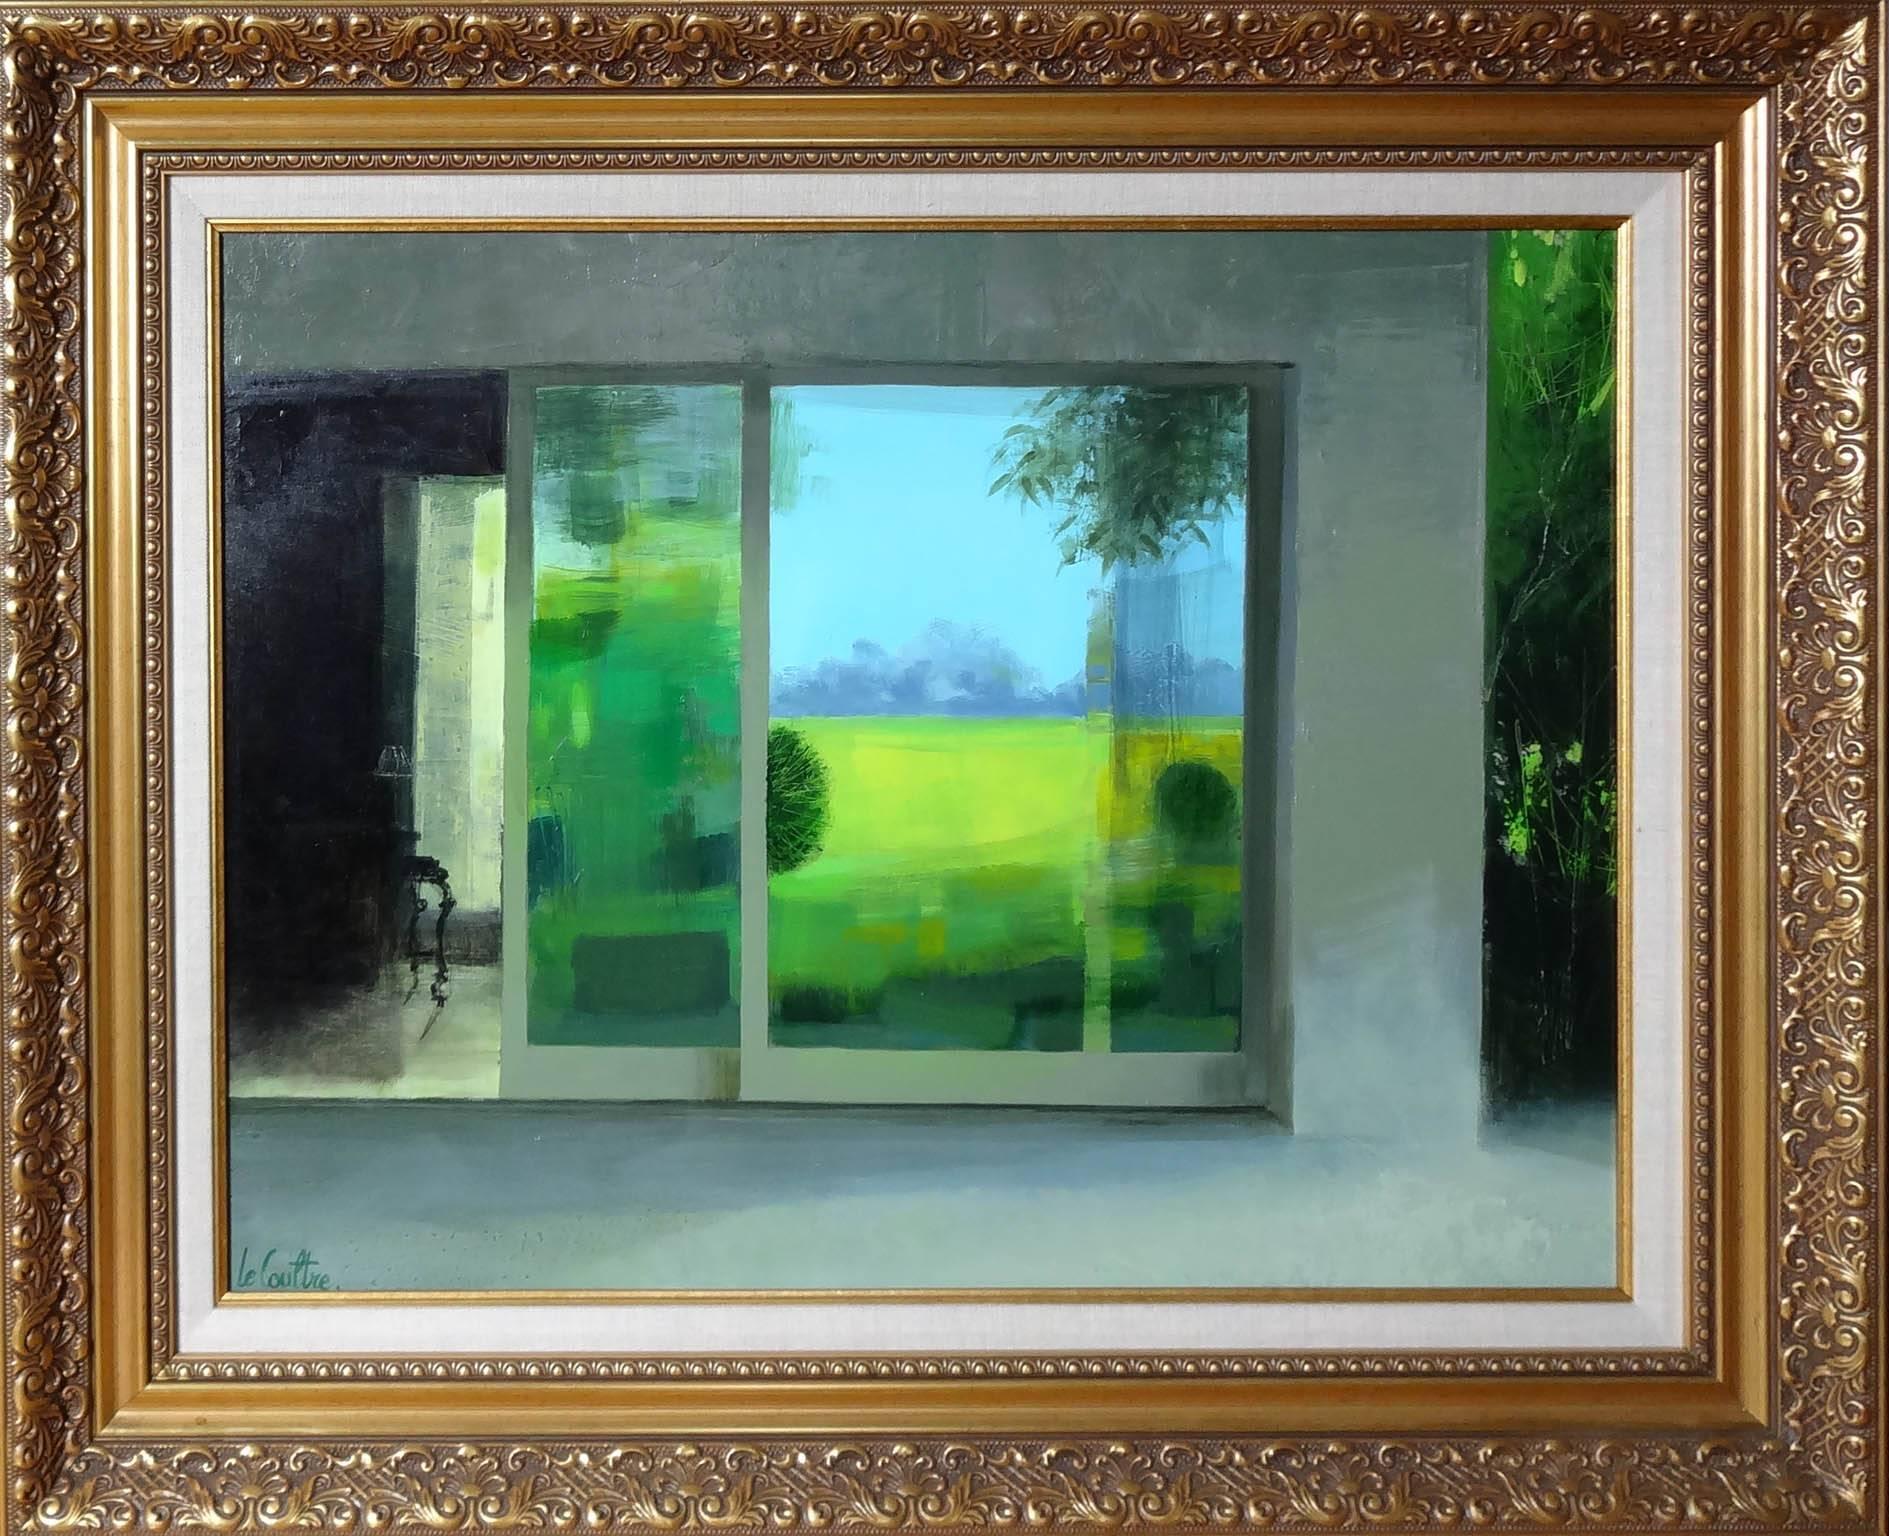 Green Reflections (Reflets Verts) - Painting by Marc le Coultre